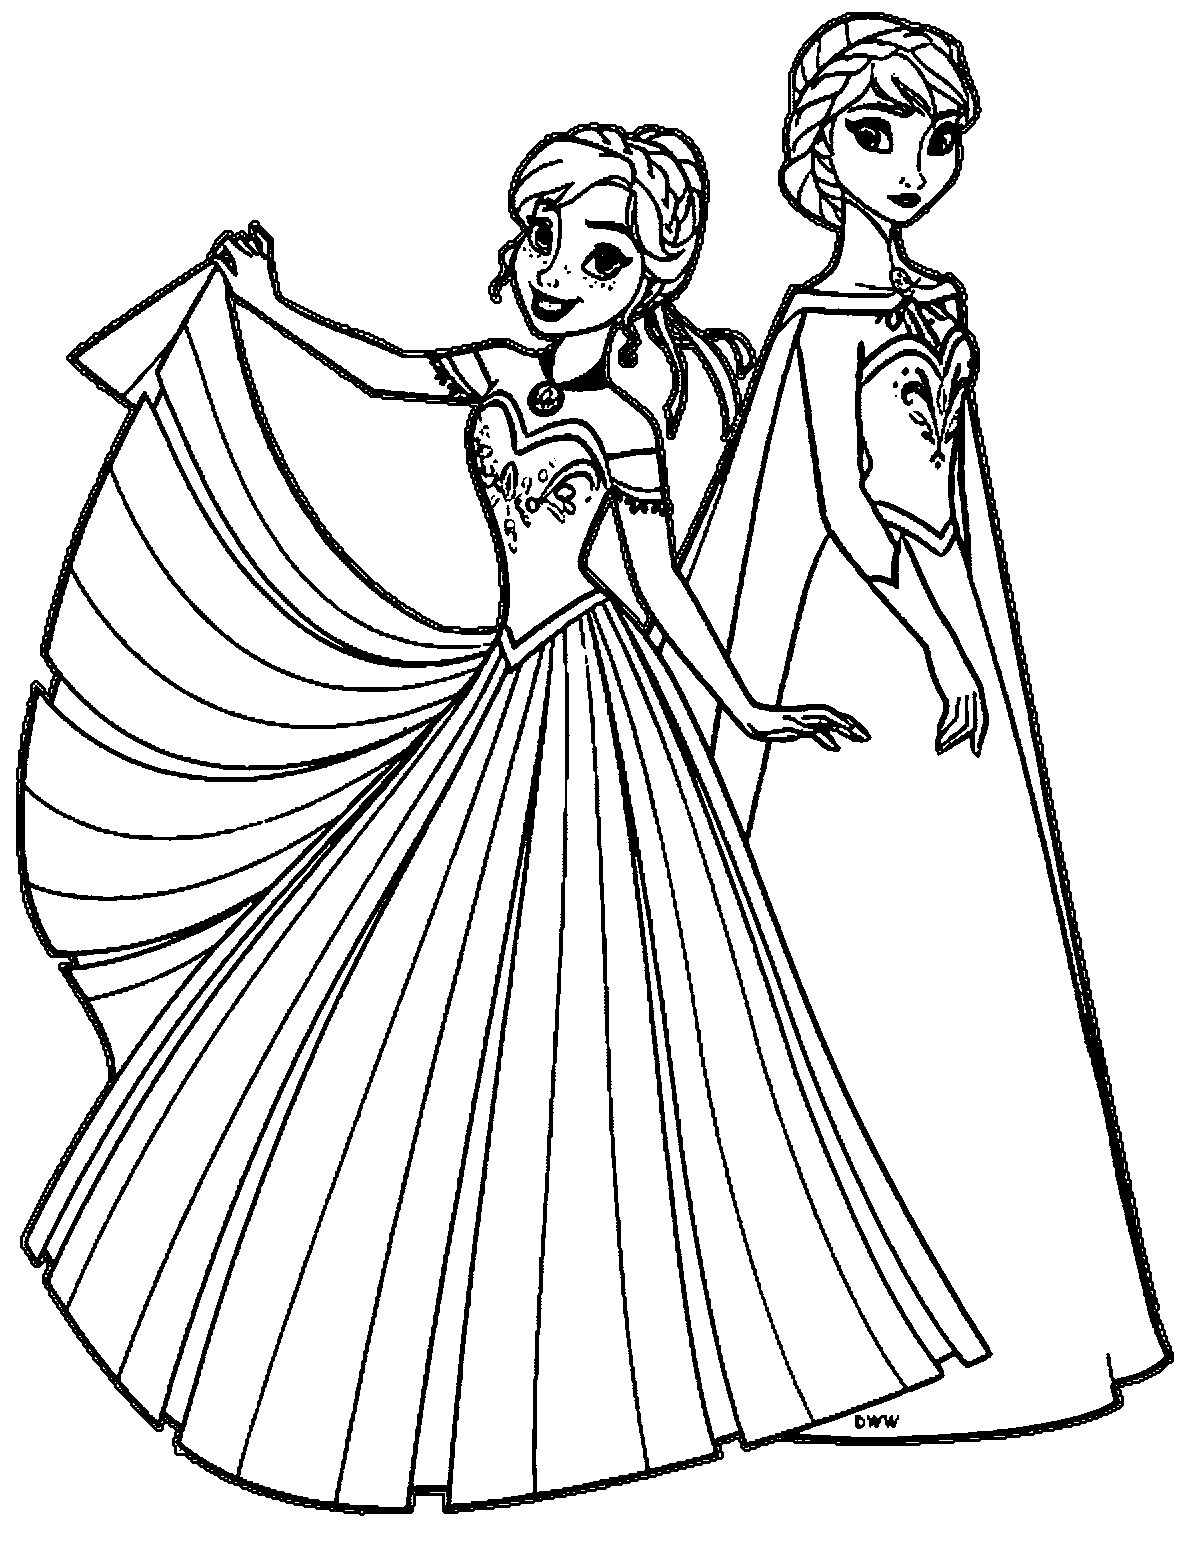 anna and elsa pictures to color elsa and anna coloring pages coloring home anna and color elsa pictures to 